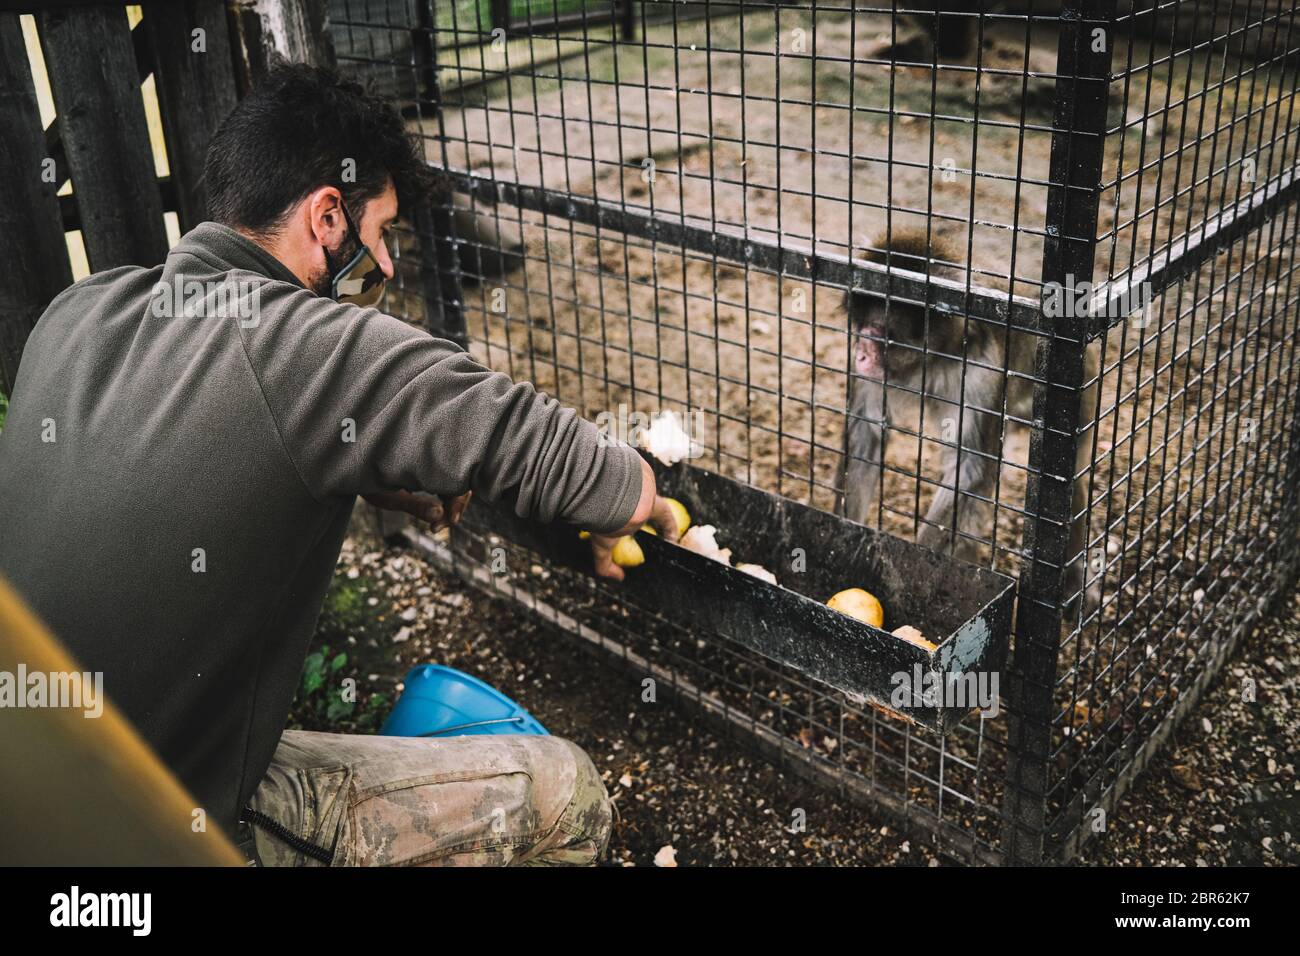 Walter, a zoo employee, taking care and feeding a monkey in the early morning. Turin 20-5-2020 Murazzano ( Cuneo ) The Langhe safari park has been closed since March because of the Covid-19 emergency. In order to continue feeding and taking care of the animals, they had to seek help from restaurateurs, farmers and shopkeepers to donate food to feed the animals. Born in 1976 in Murazzano in the beautiful Langhe area, the park is home to numerous species such as zebras, jaguars, wolves, camels, kangaroos, hippos and many other species Torino 20 Maggio 2020 Parco Safari delle Langhe - Muraz Stock Photo